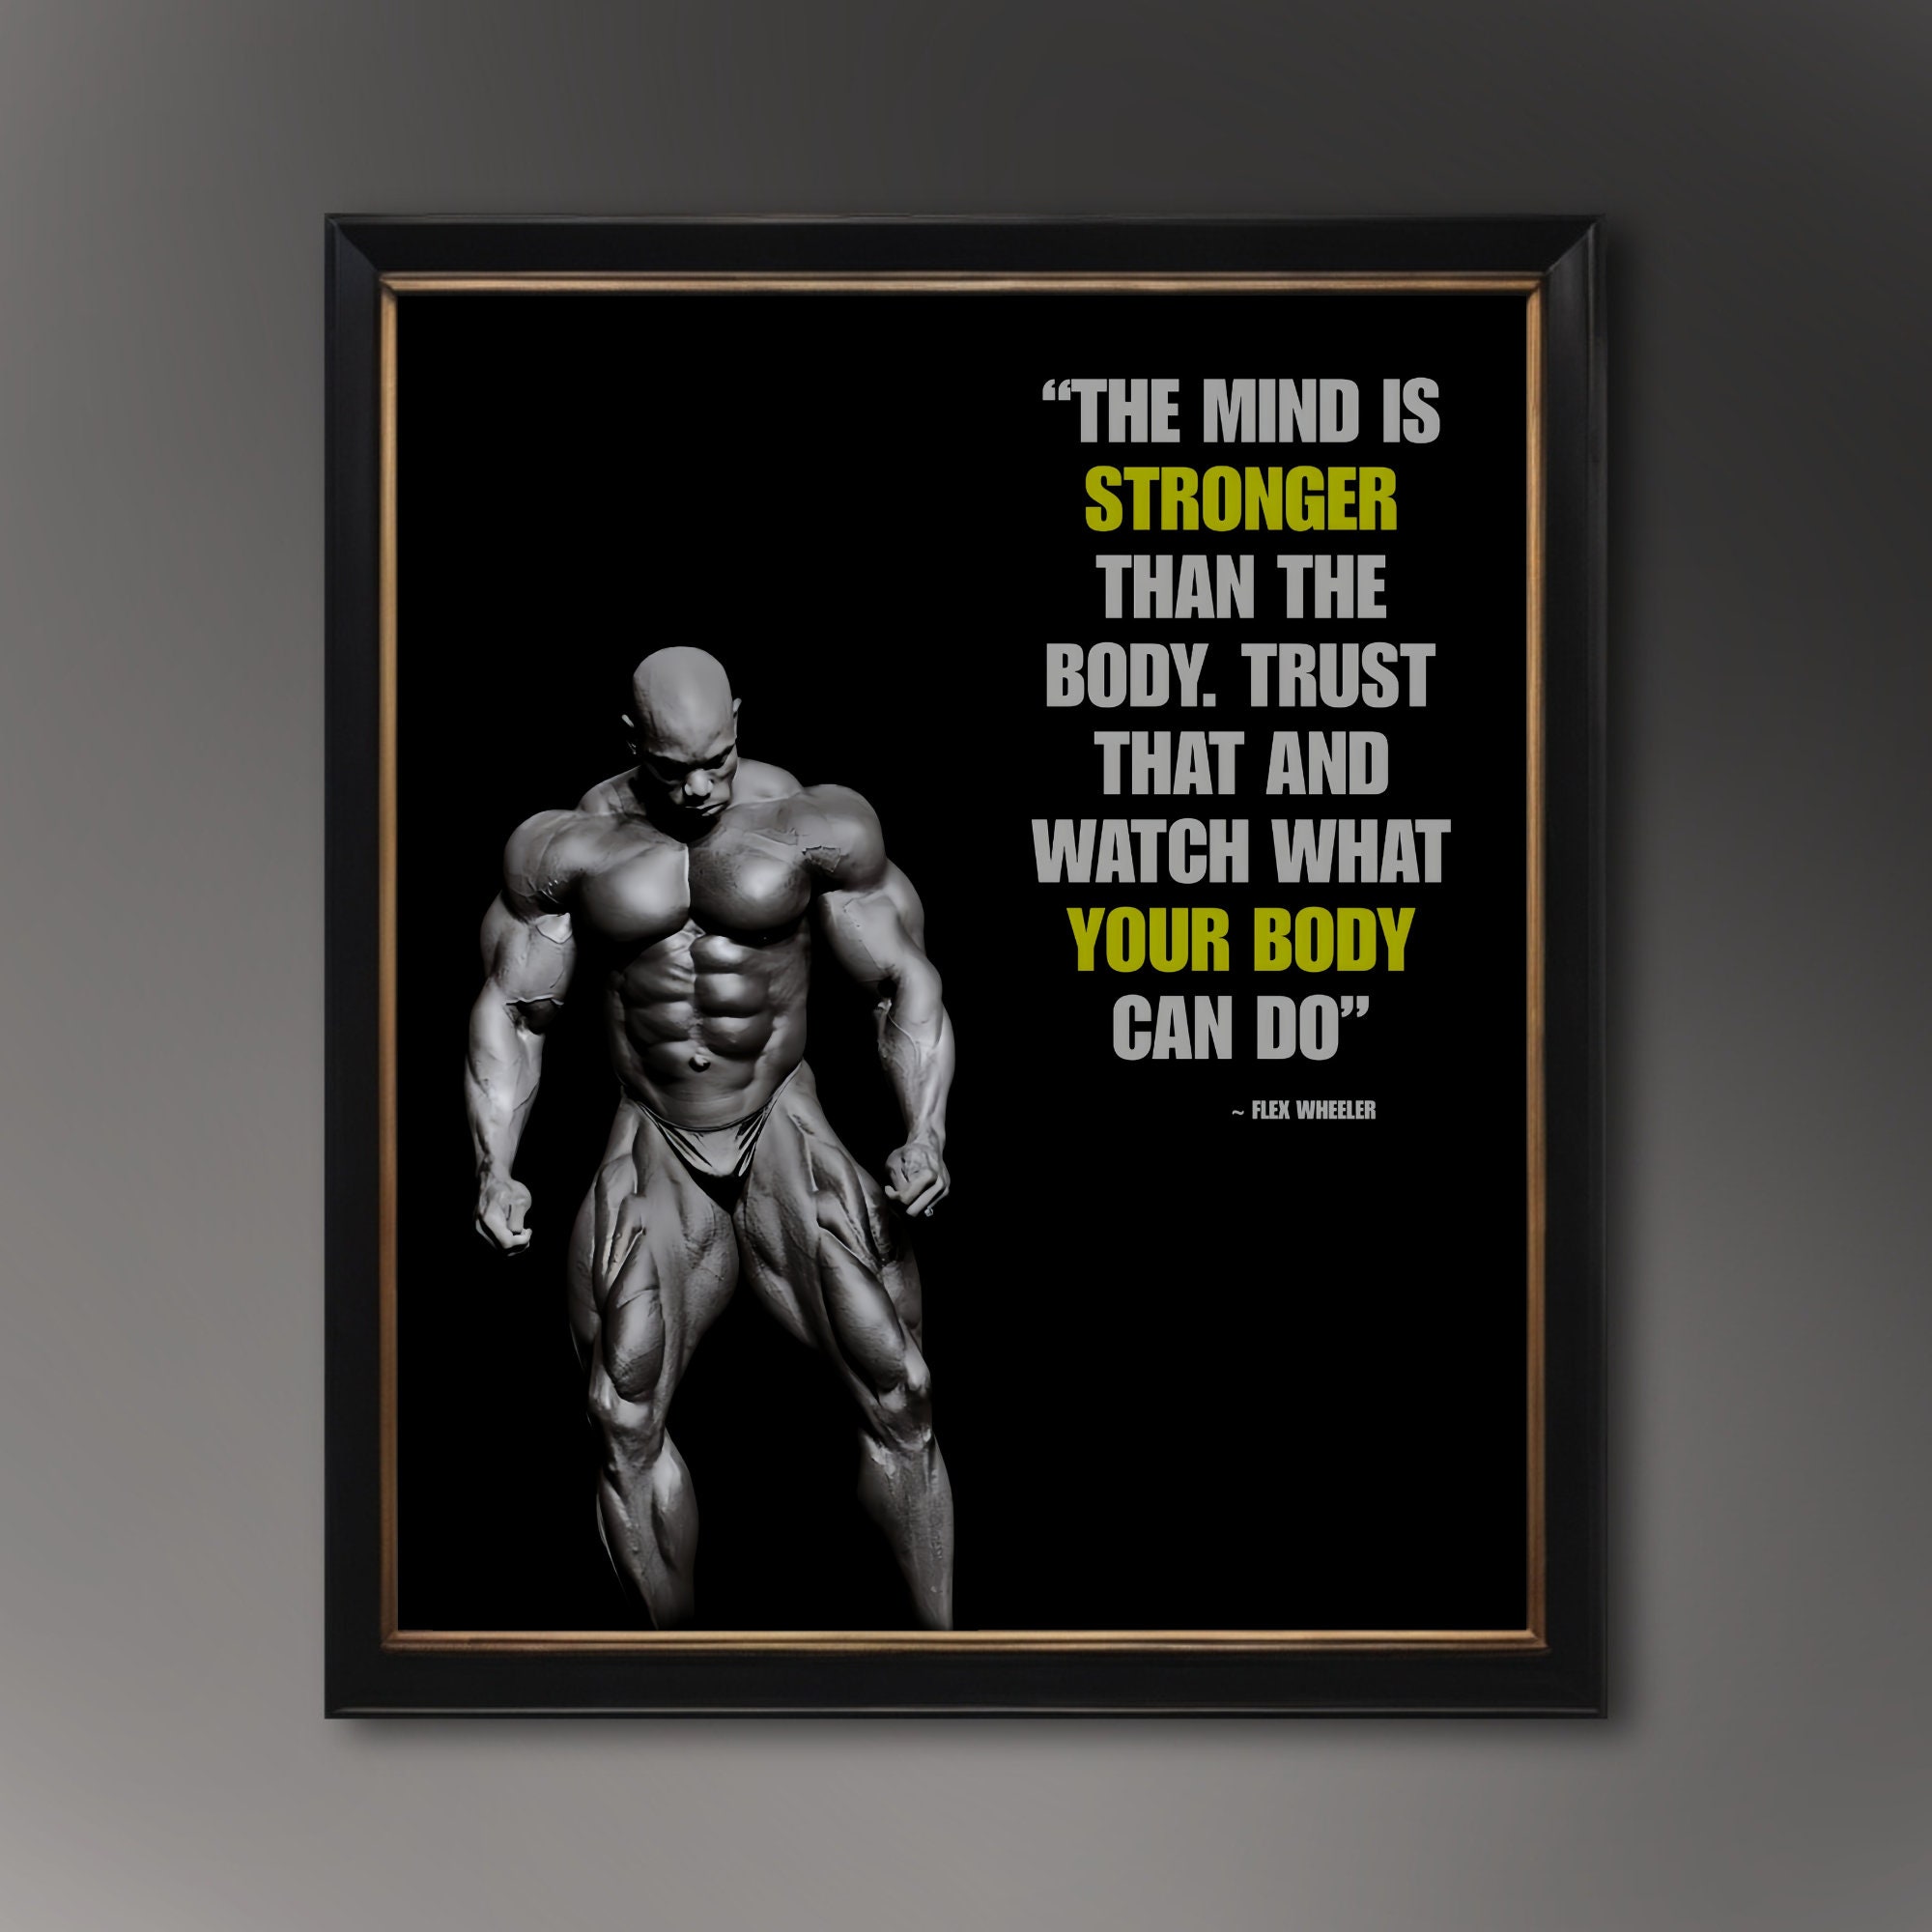 Bodybuilder, artwork F006 / 7326 For sale as Framed Prints, Photos, Wall  Art and Photo Gifts